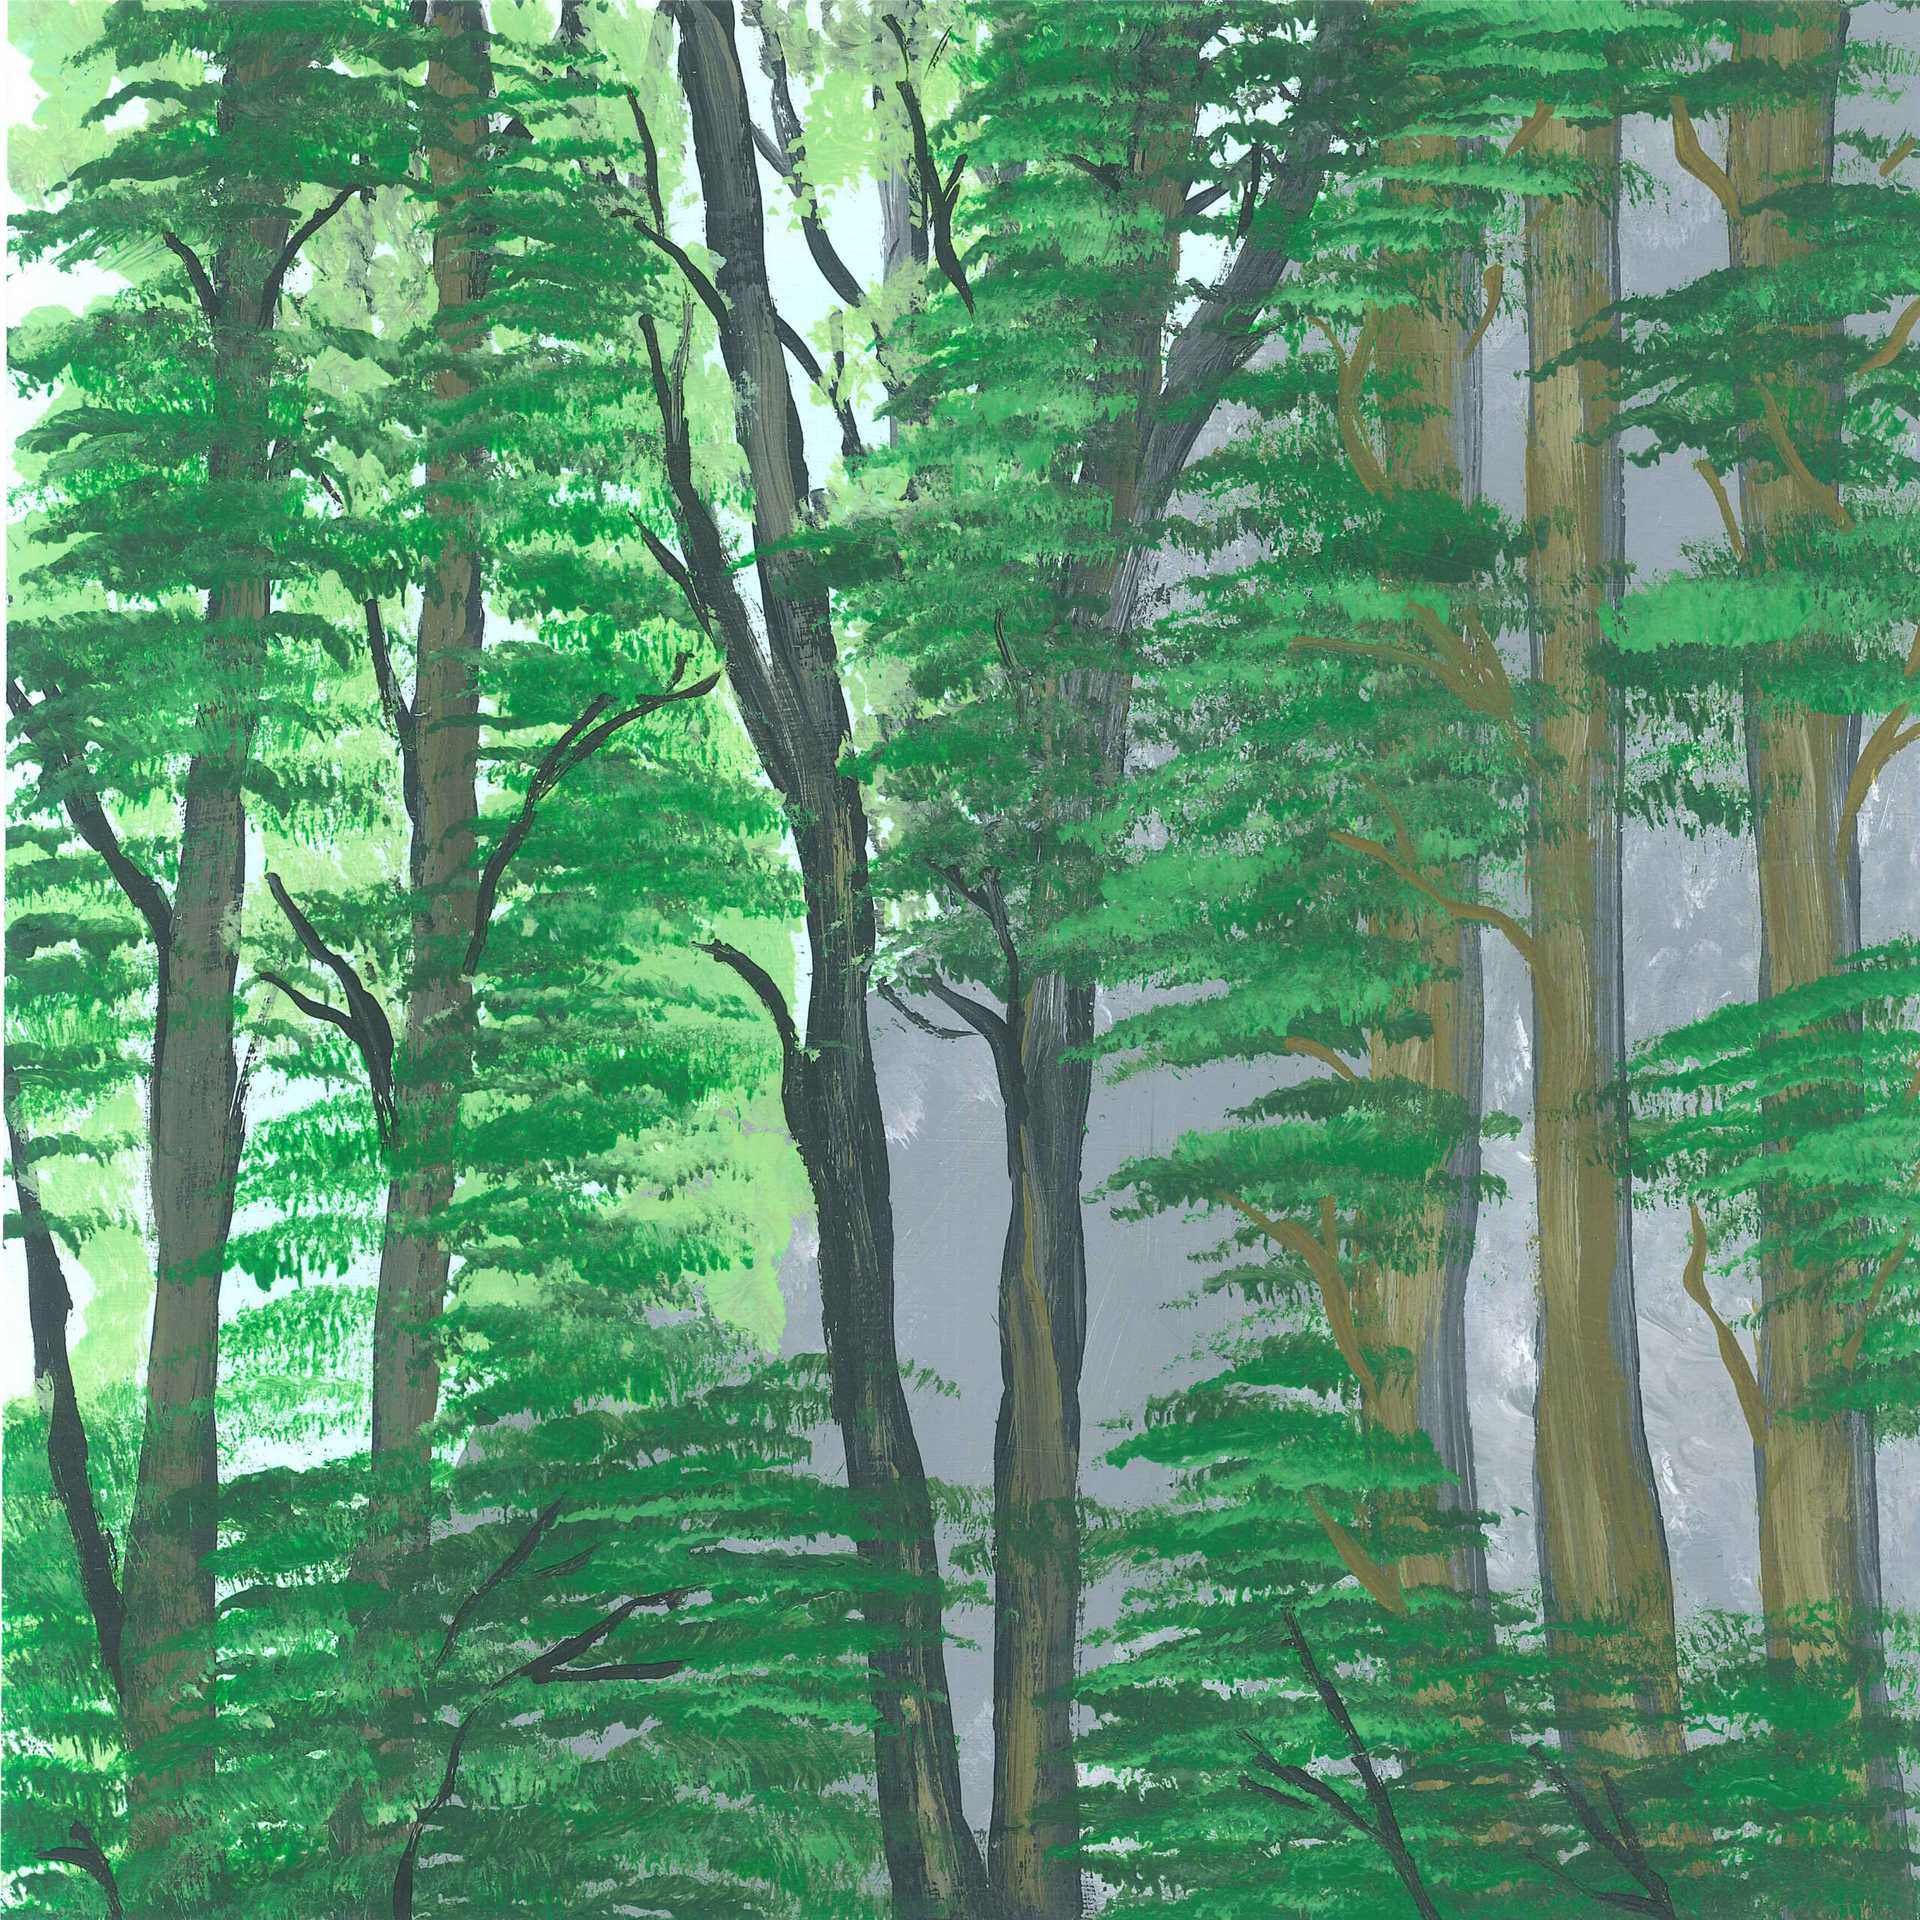 Morning in the Fedosov Forest - nature landscape painting - earth.fm